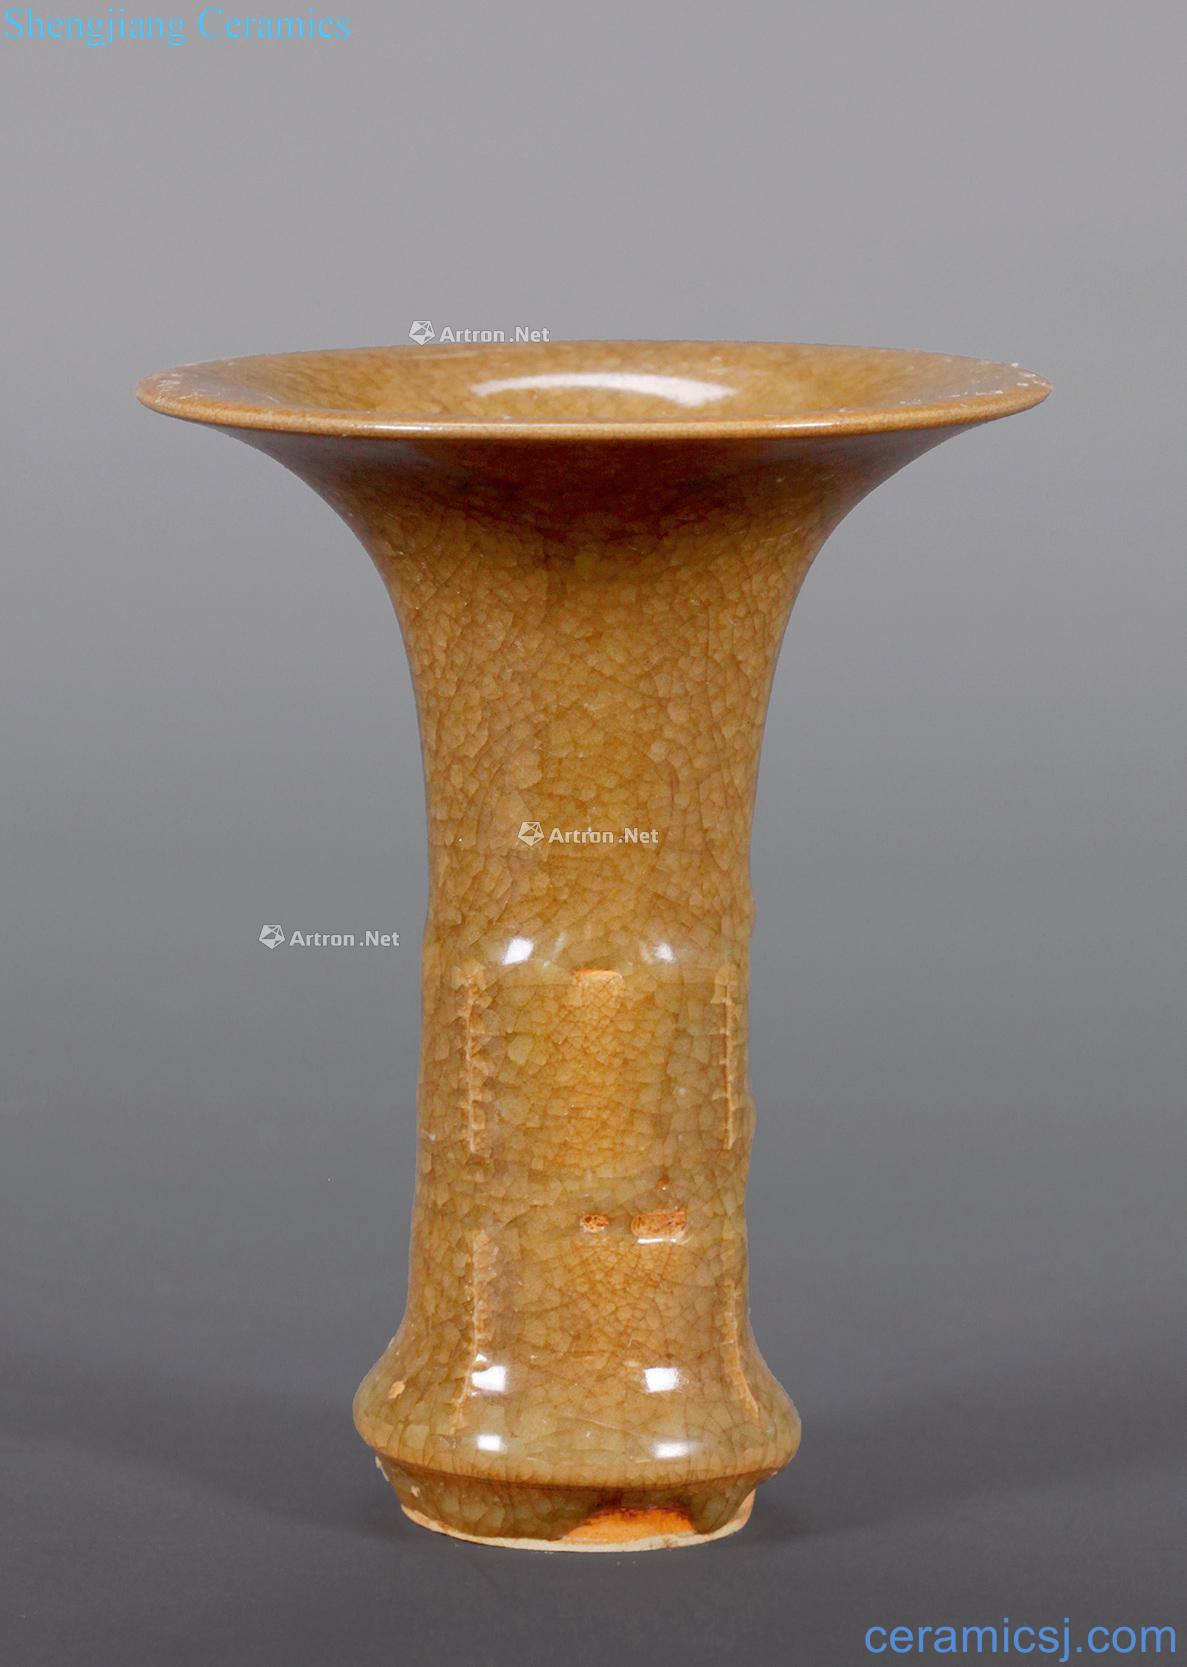 The southern song dynasty Open trailers yellow glaze vase with